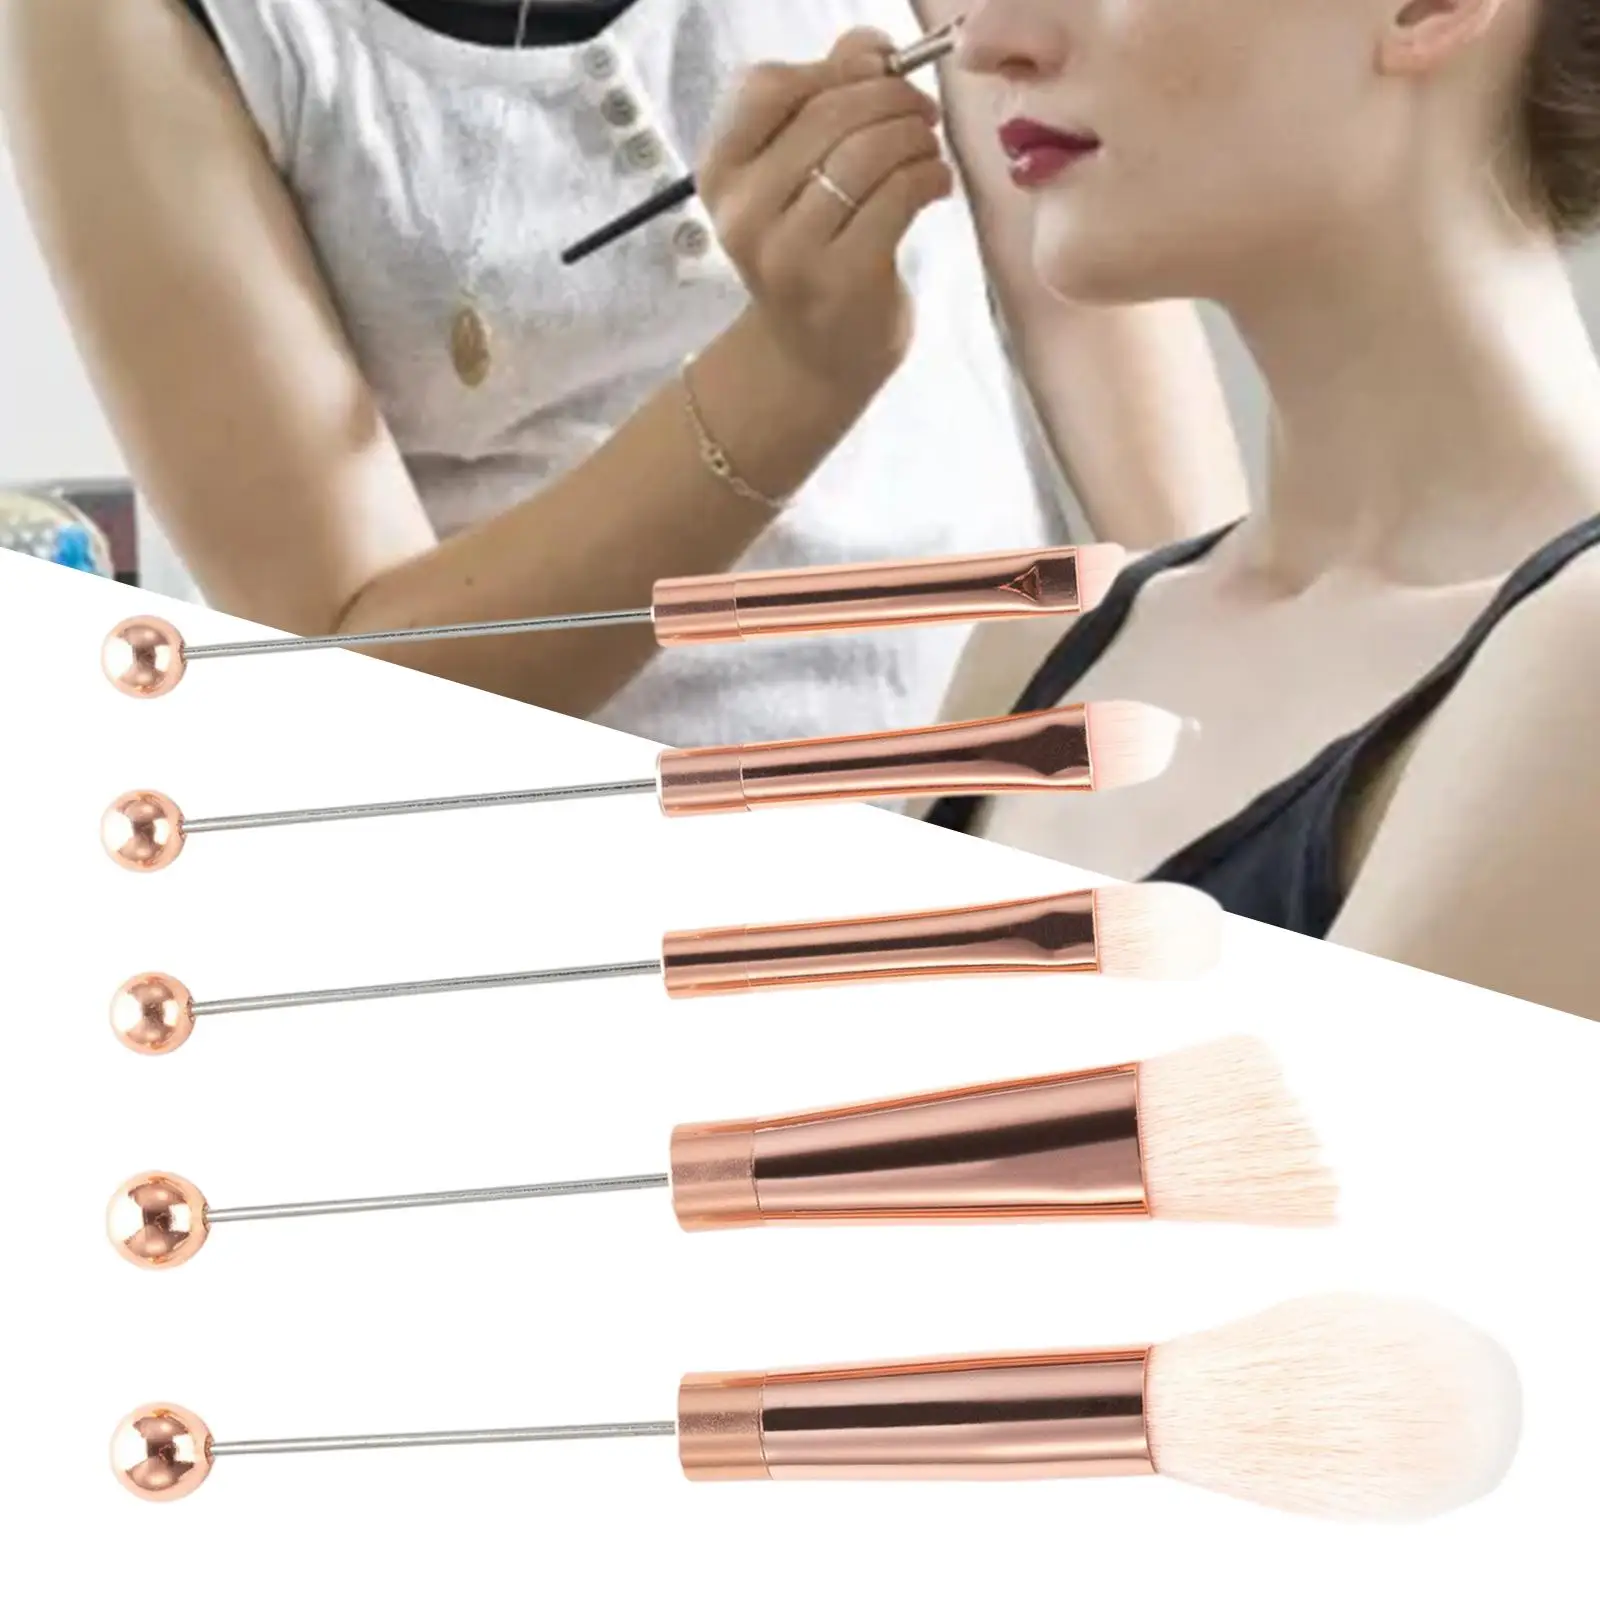 5x Eye Makeup Brush Set DIY Angled Brush Blending Face Powder Portable Cosmetic Brushes for Lady Girlfriend Bestie Sister Gifts